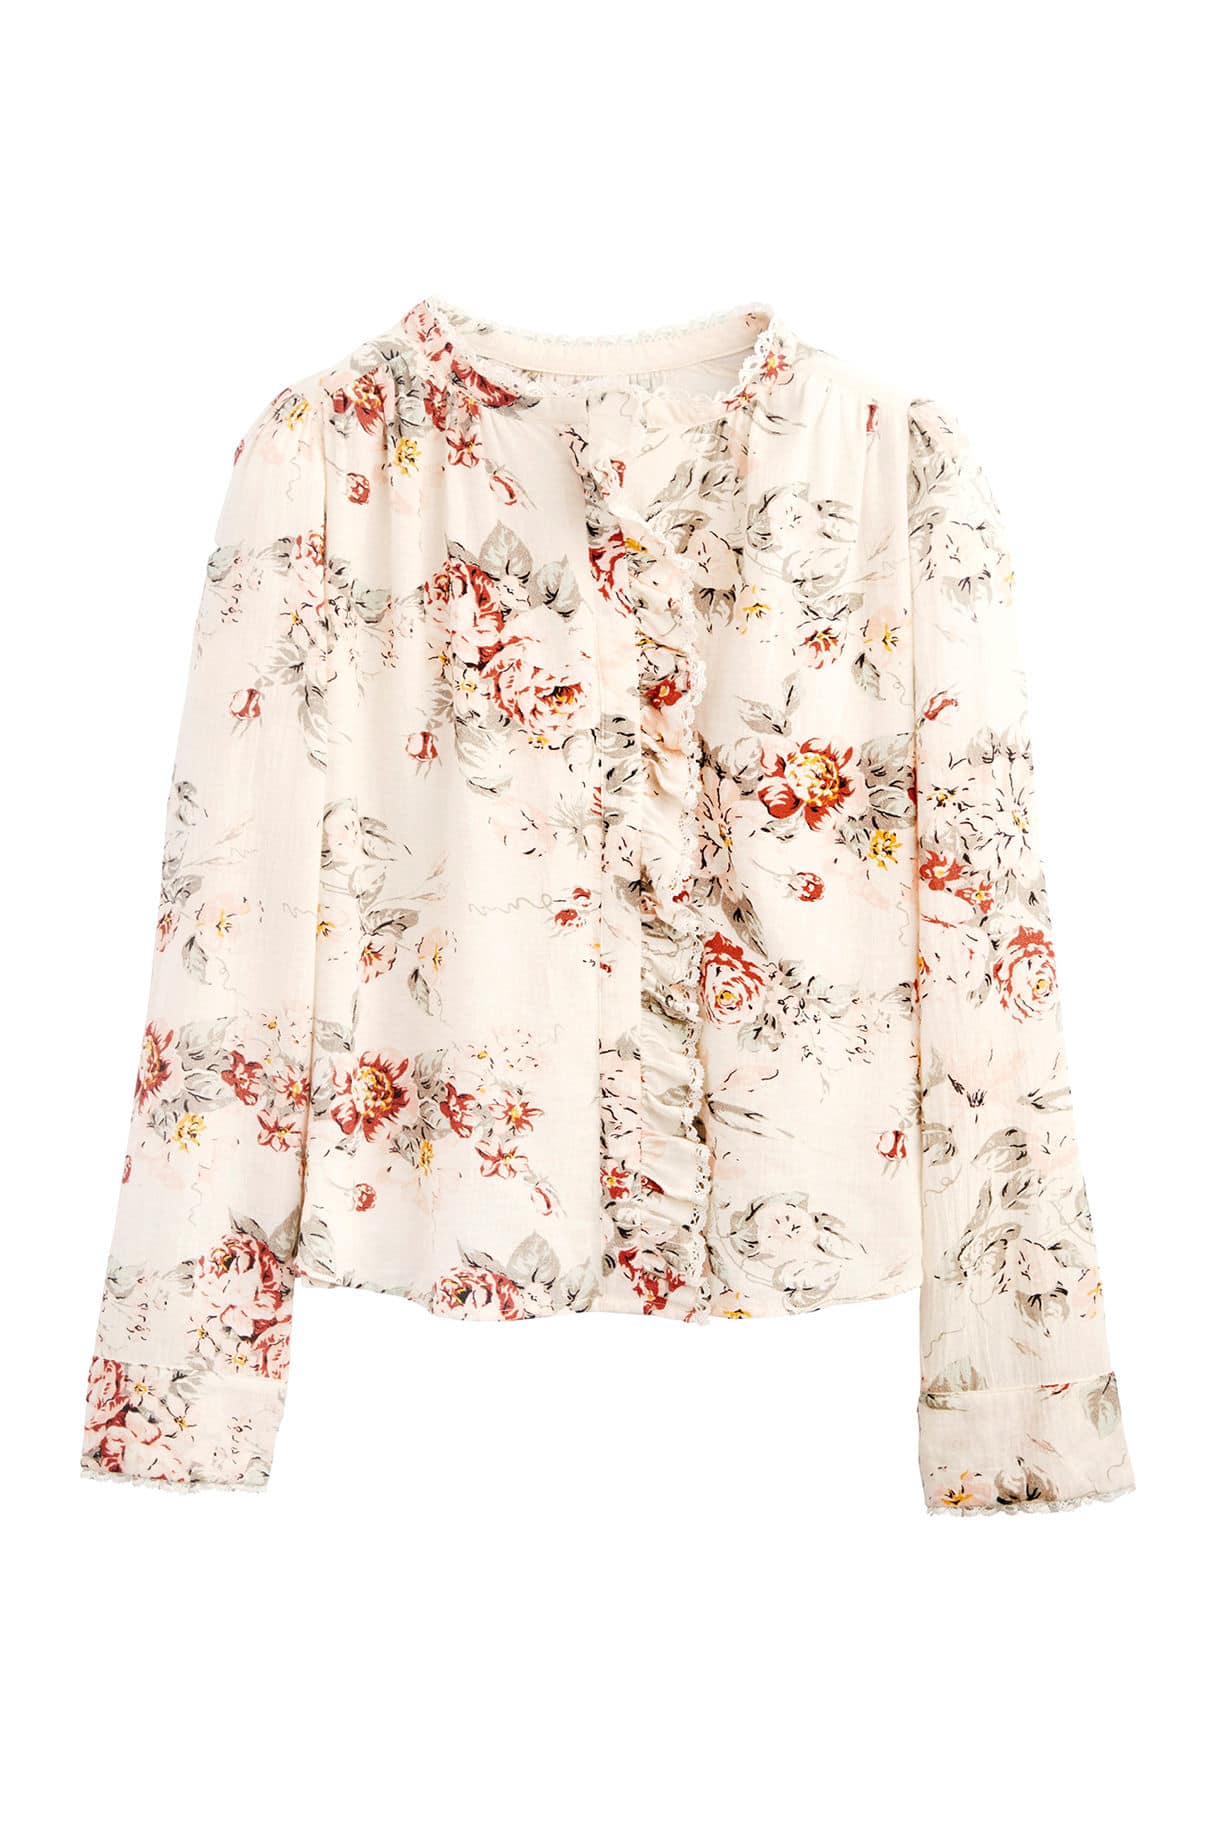 the fashion magpie rebecca taylor floral blouse